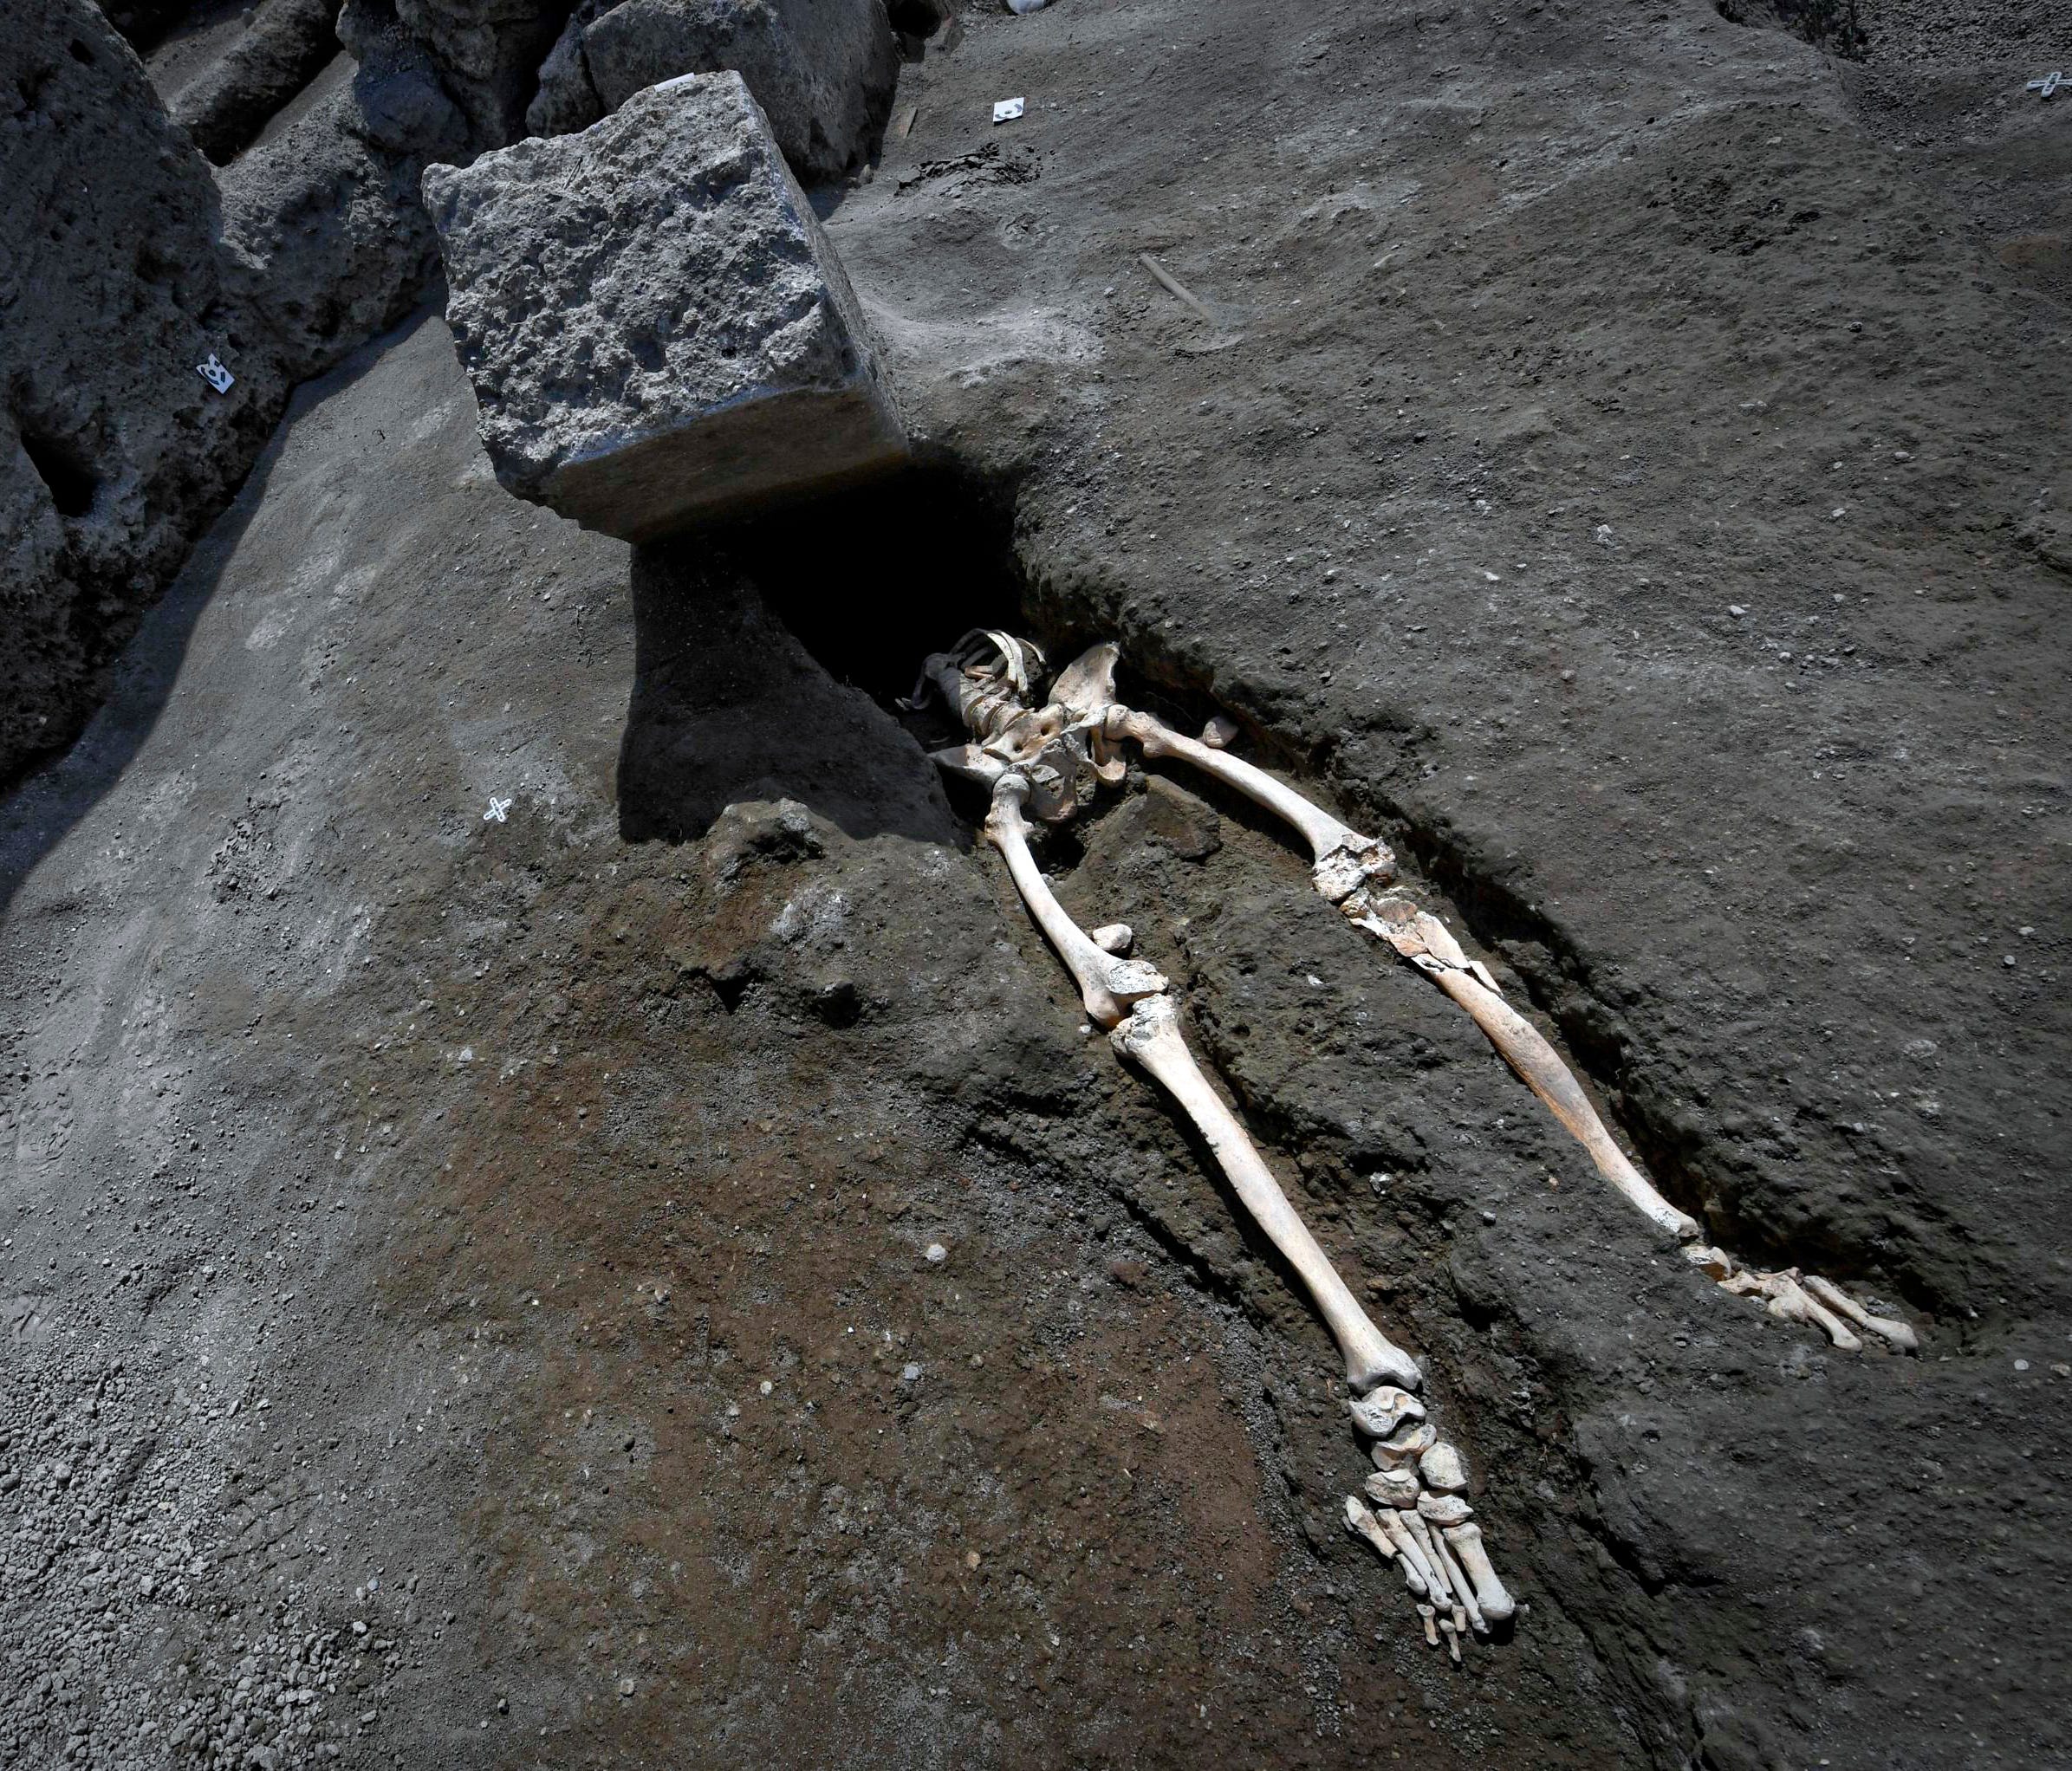 The legs of a skeleton emerge from the ground beneath a large rock believed to have crushed the victim's bust during the eruption of Mt. Vesuvius in A.D. 79, which destroyed the ancient town of Pompeii, at Pompeii's archeological site, near Naples, o